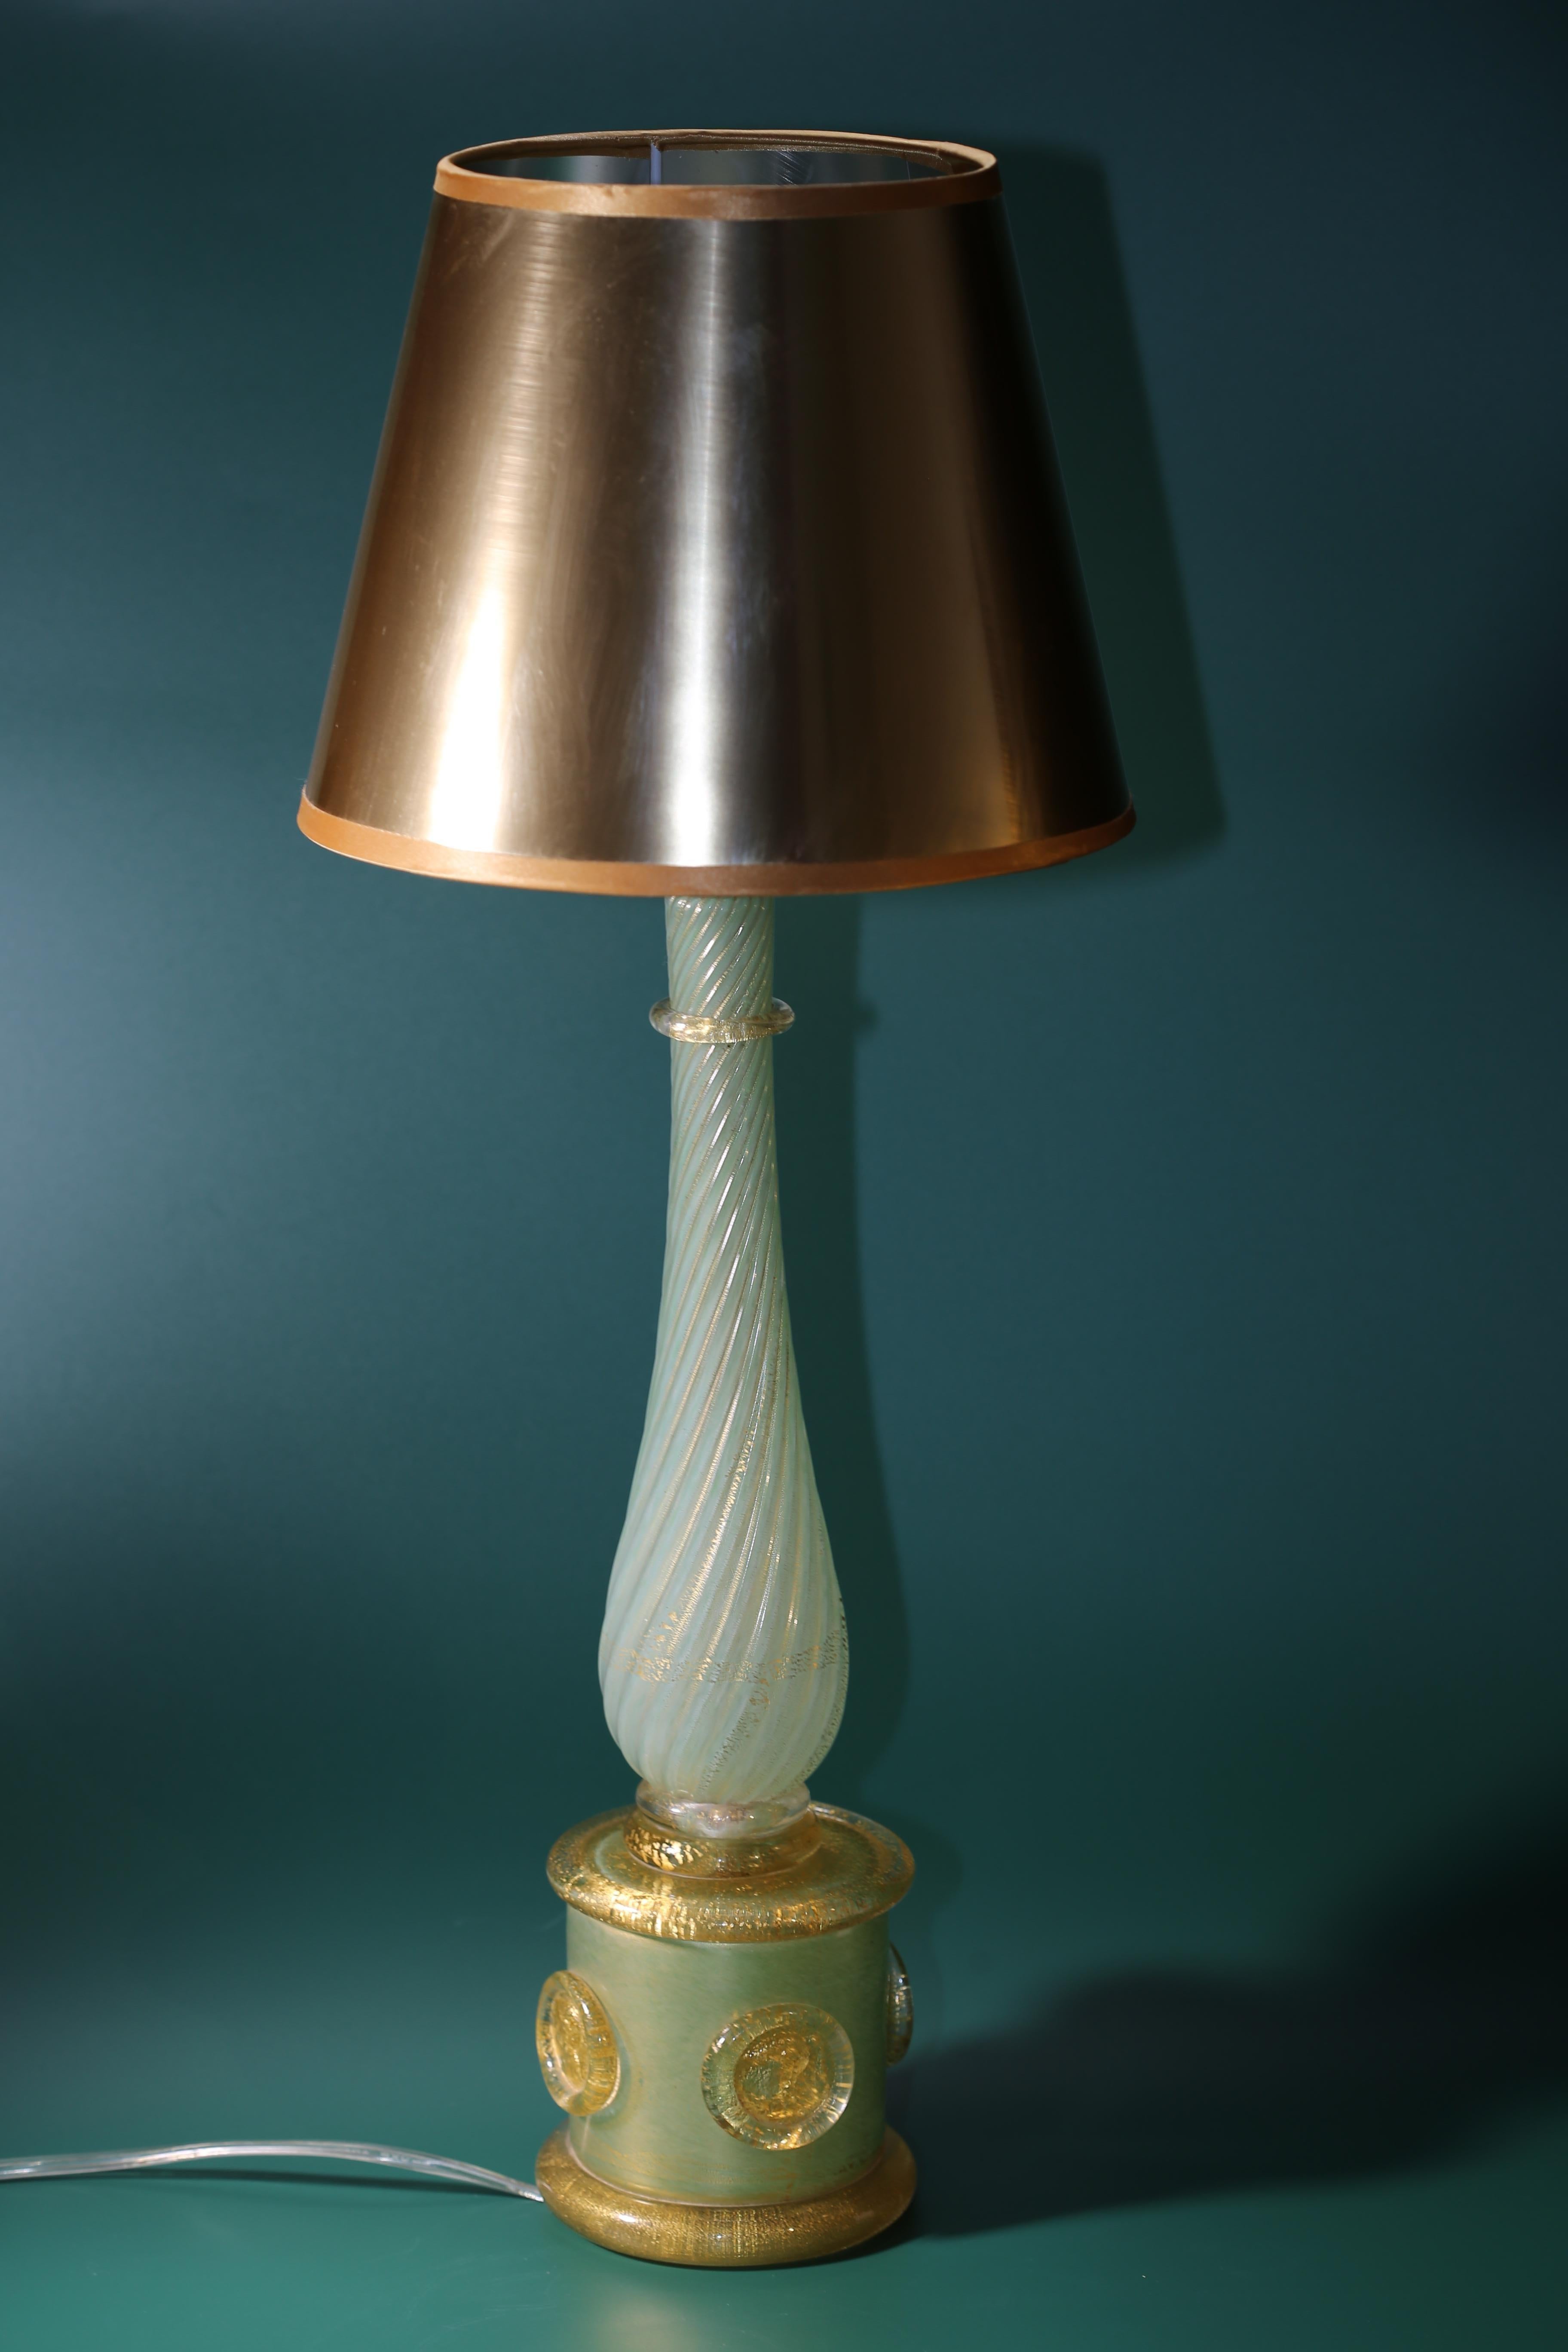 Vintage lamp made from Murano Glass. Made in Italy. New custom made lampshade. Rewired with new plug and electric wire.